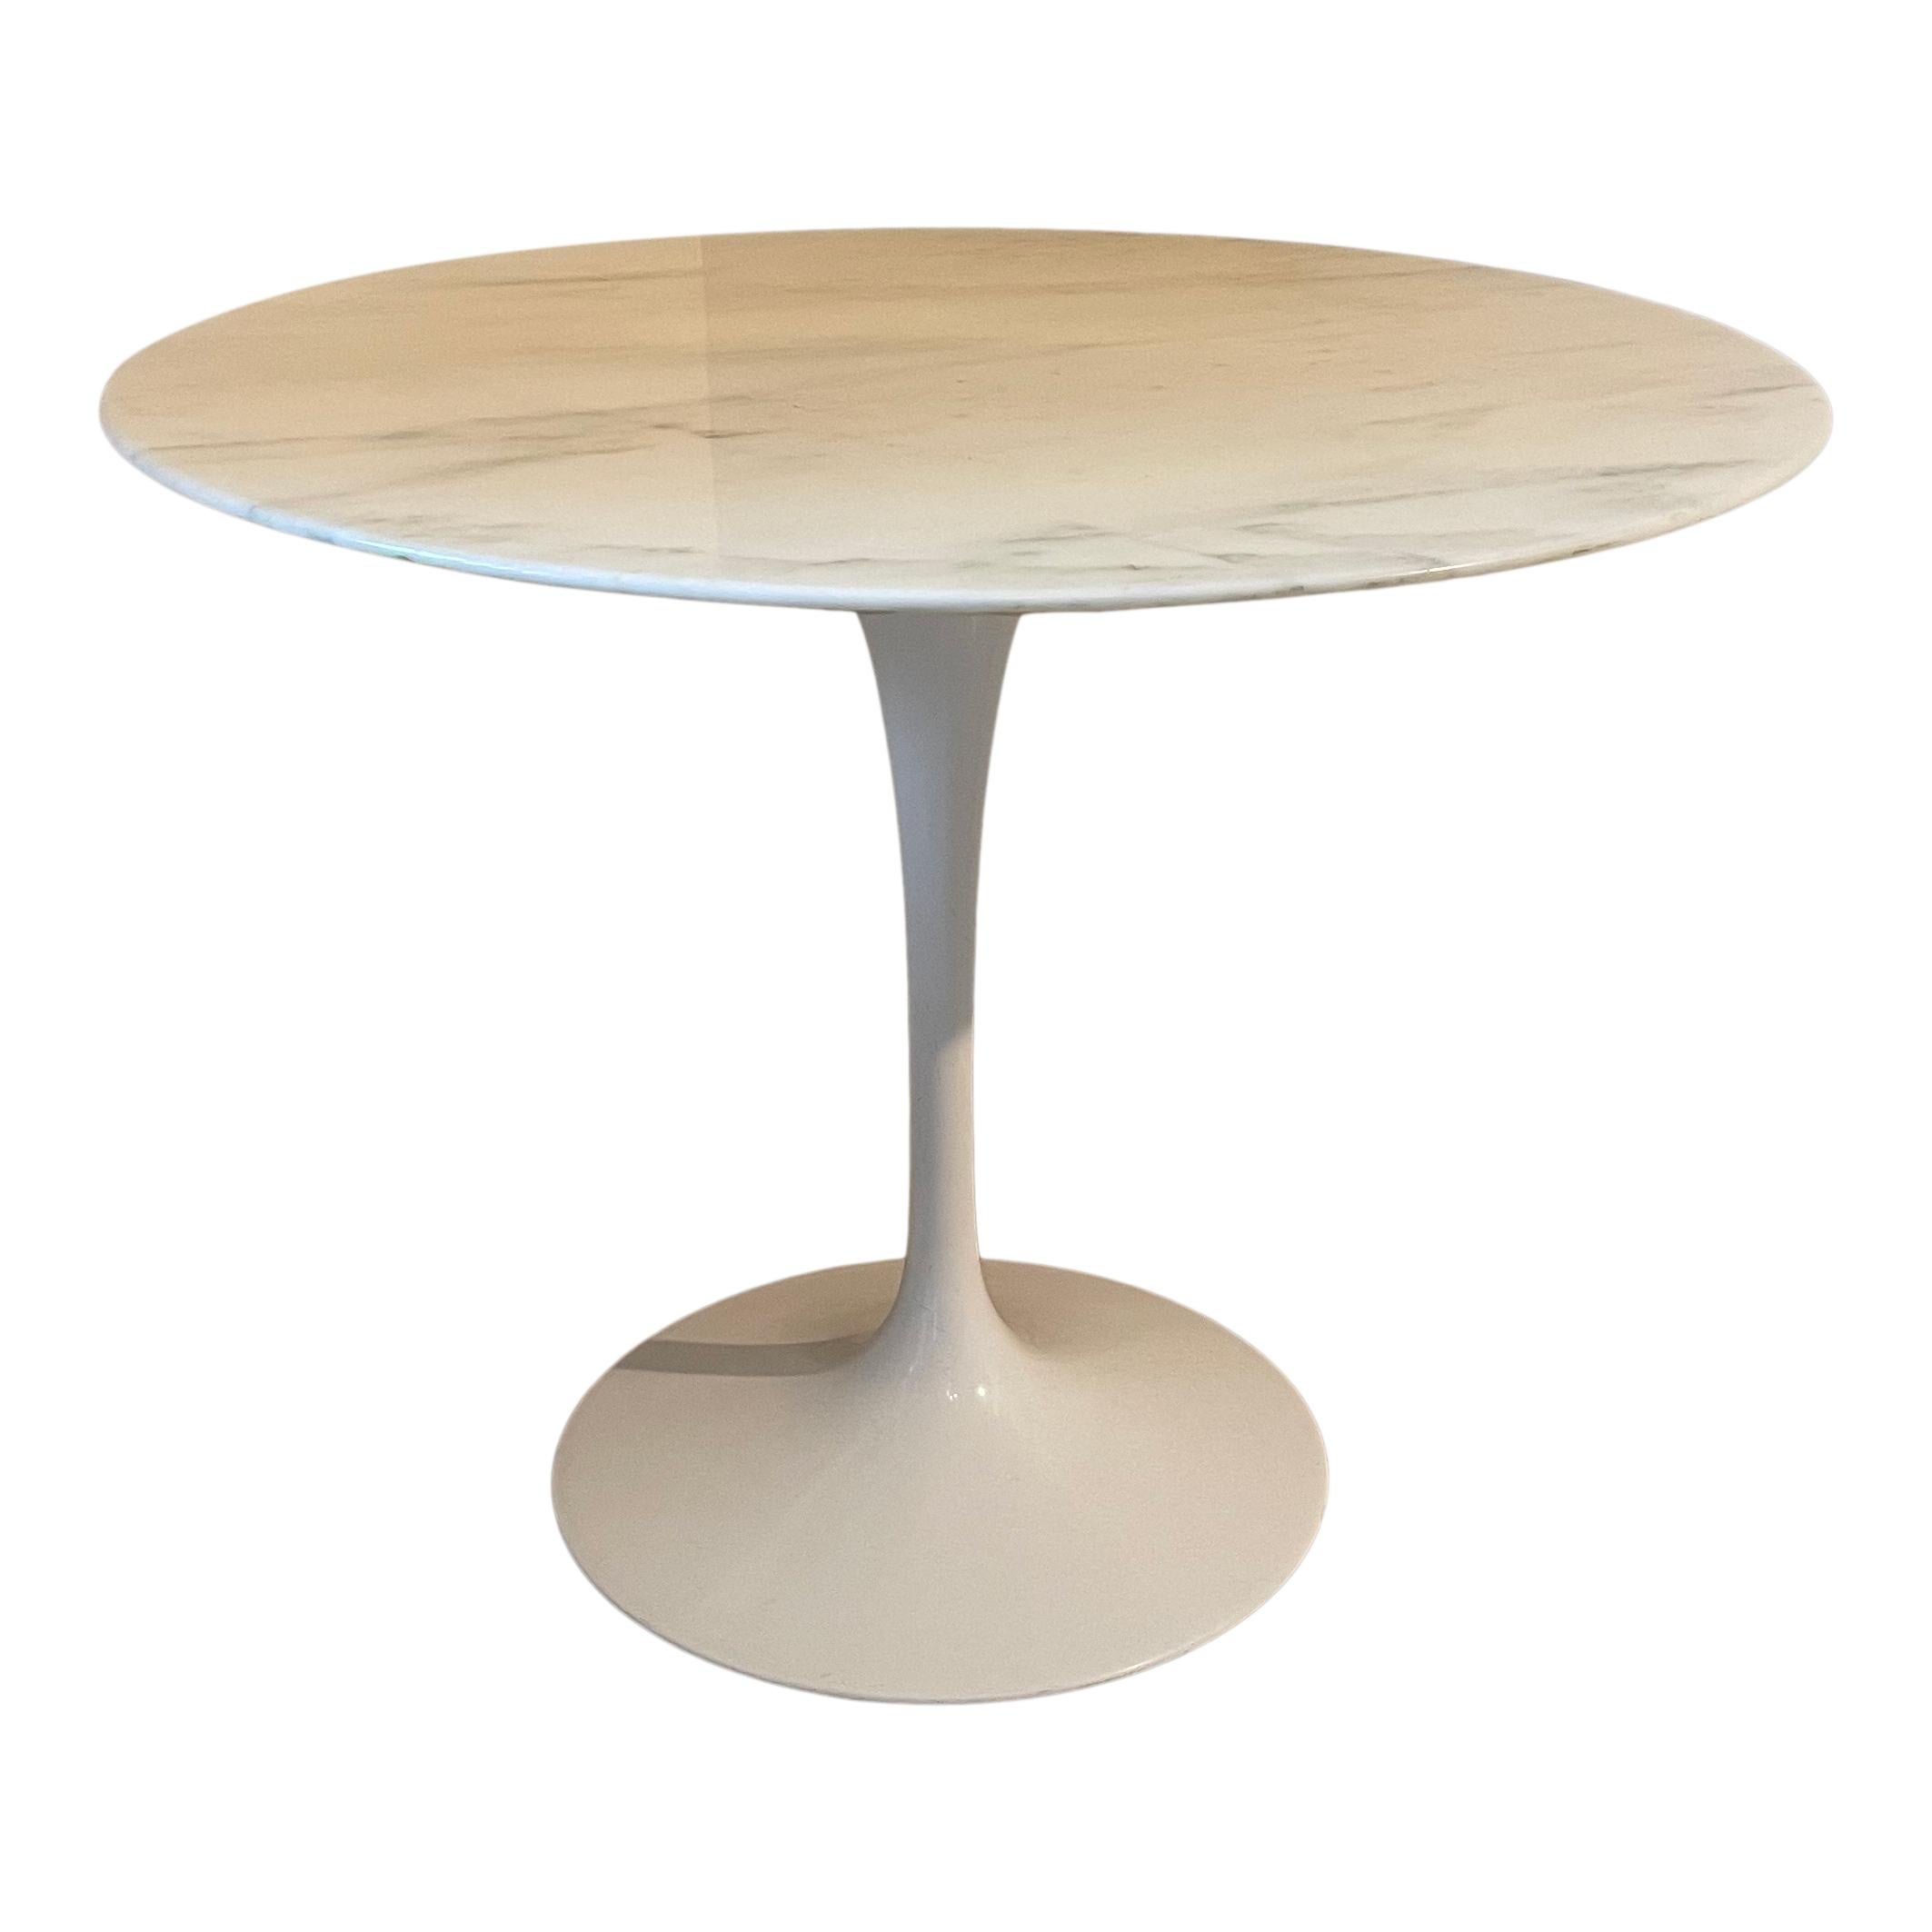 Tulip round dining table designed by Eero Saarinen in 1957 and manufactured by Knoll in 1967.

Composed of a white lacquered pedestal and a tabletop made of Carrara Arabescato marble.

Excellent vintage condition.

The Tulip Table by the Eero